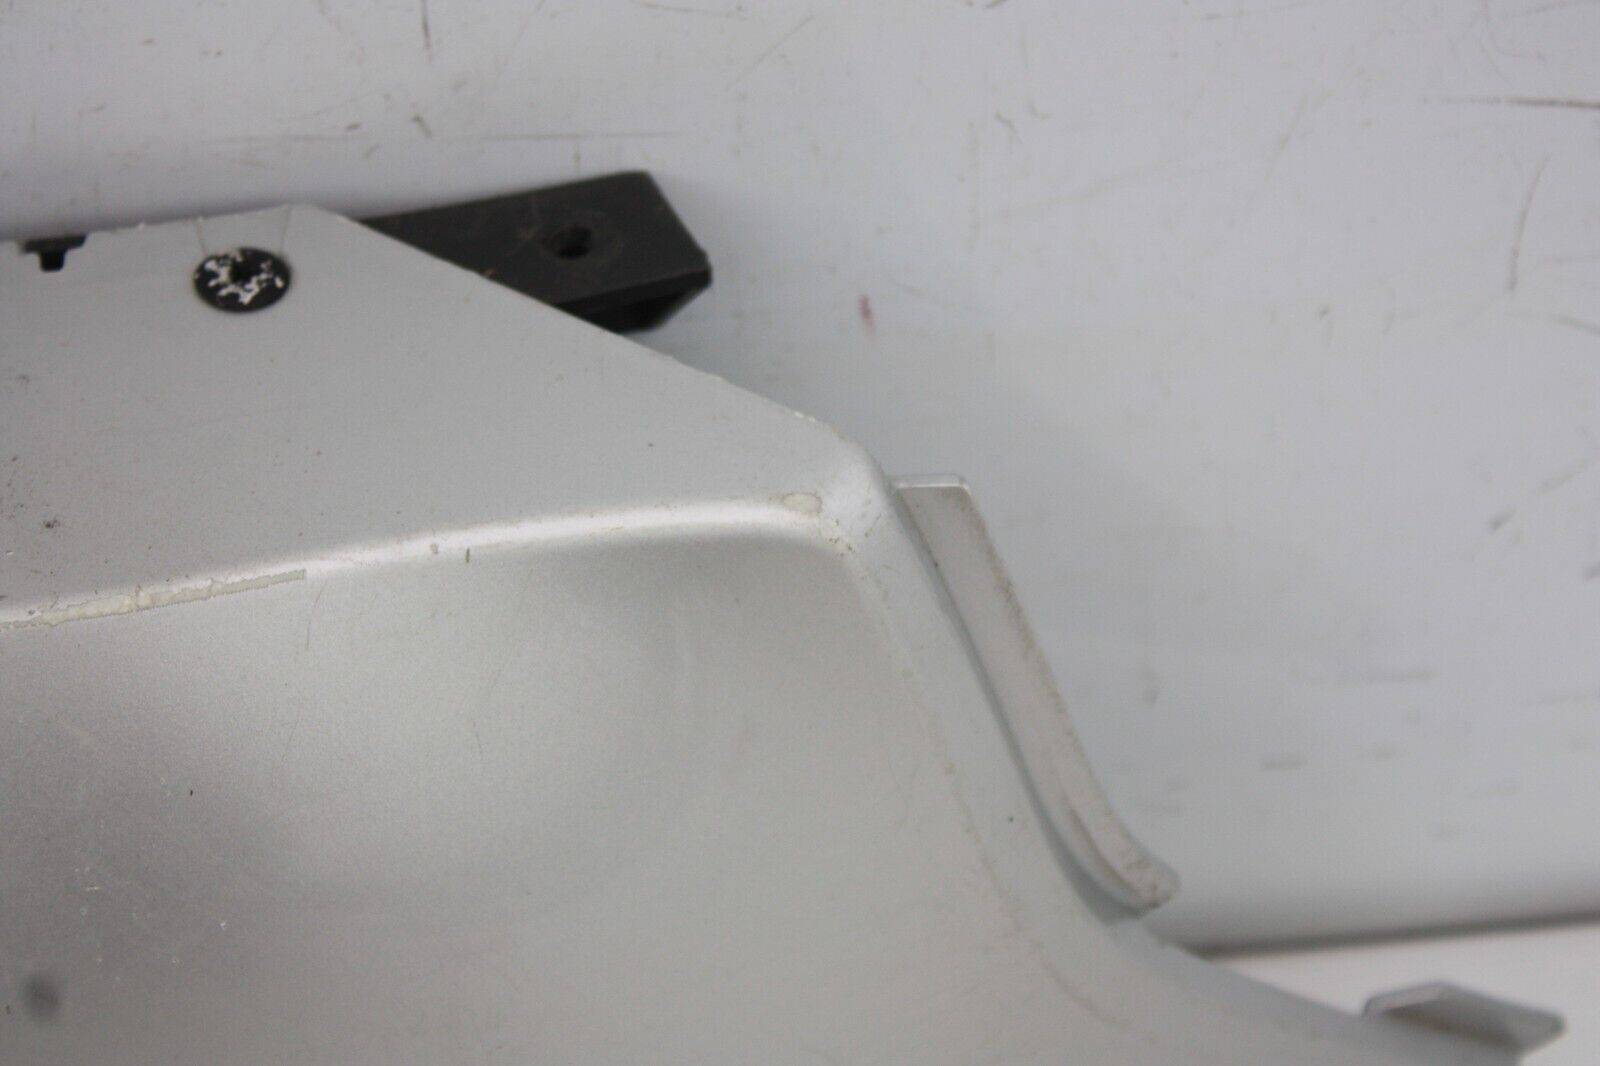 Ford-Fiesta-Rear-Bumper-Right-Side-Trim-Cover-2008-to-2012-8A6J-17B891-AAW-175883634834-3